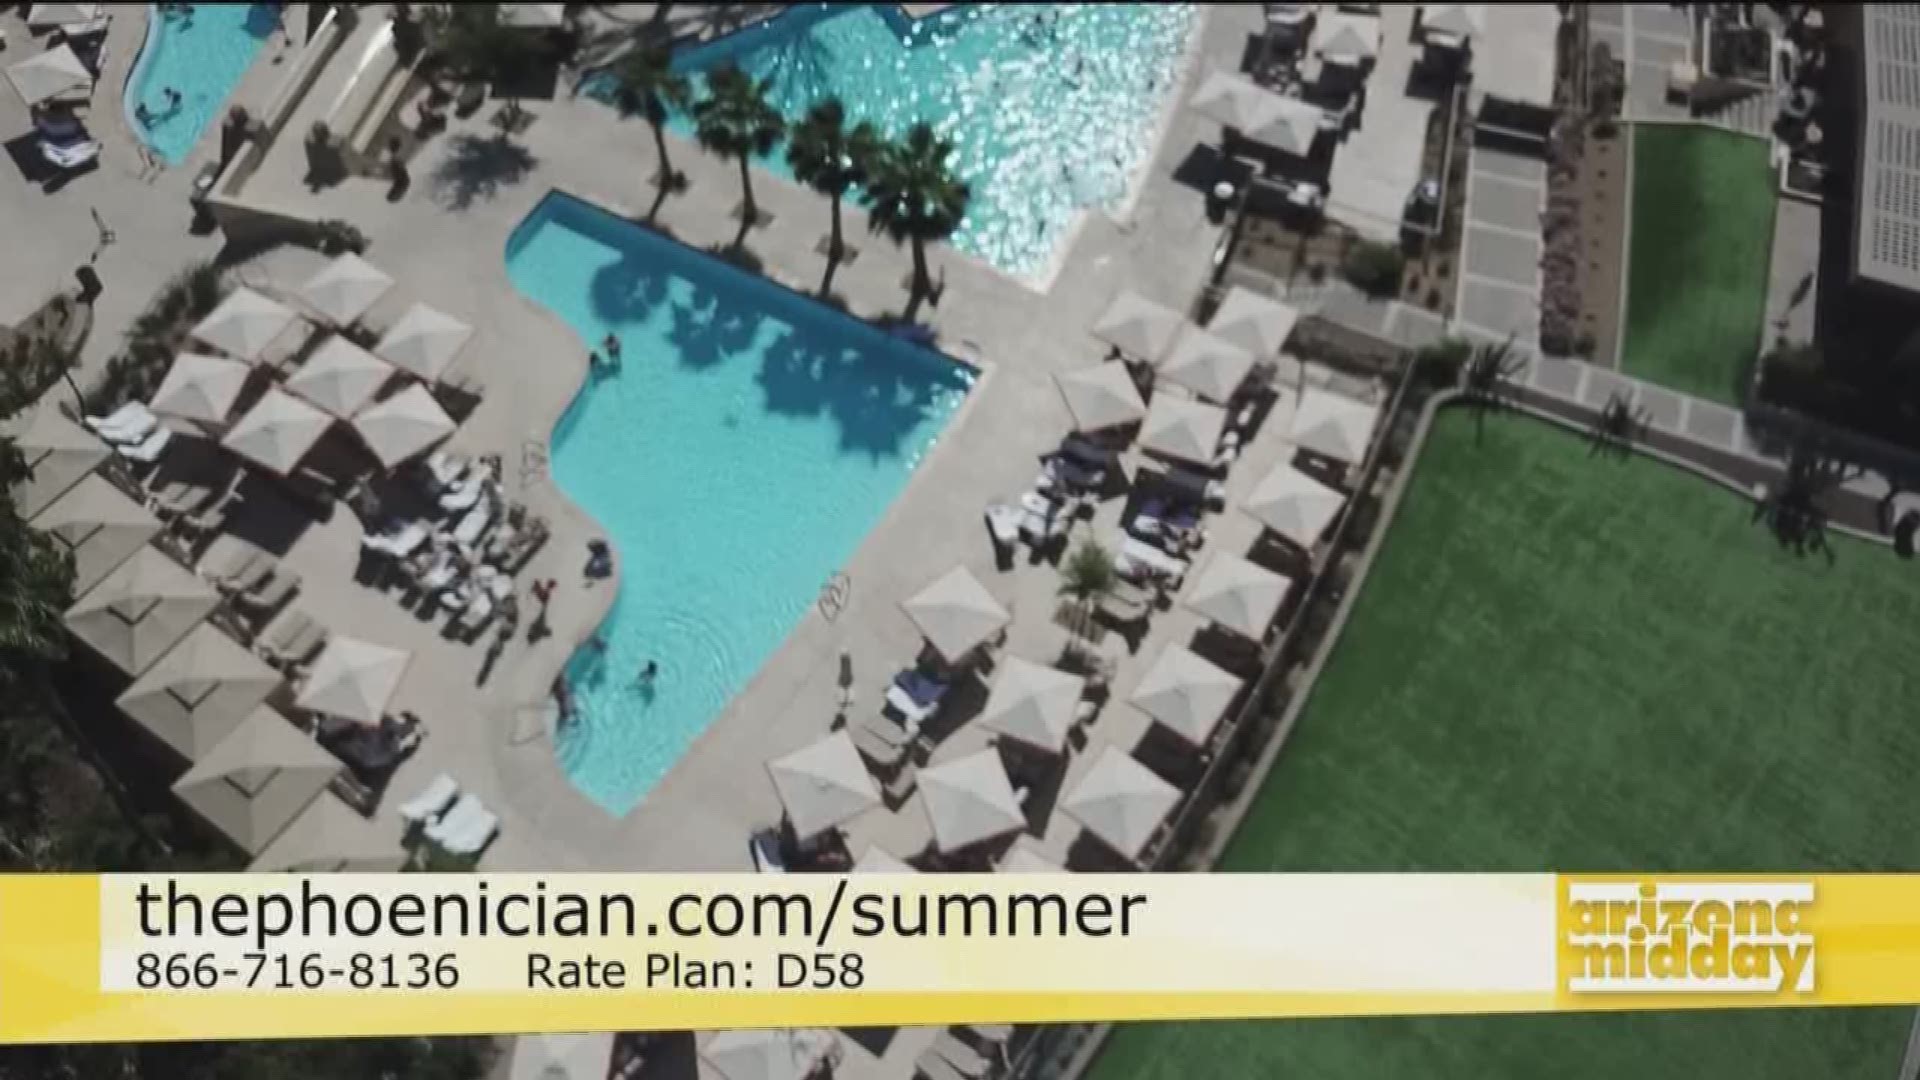 Take a staycation at the Phoenician this summer to enjoy their newly remodeled spa, athletic club, and pools. Denise Seomin talks about this summer's program, Fire and Ice - the hottest deals and the coolest activities.